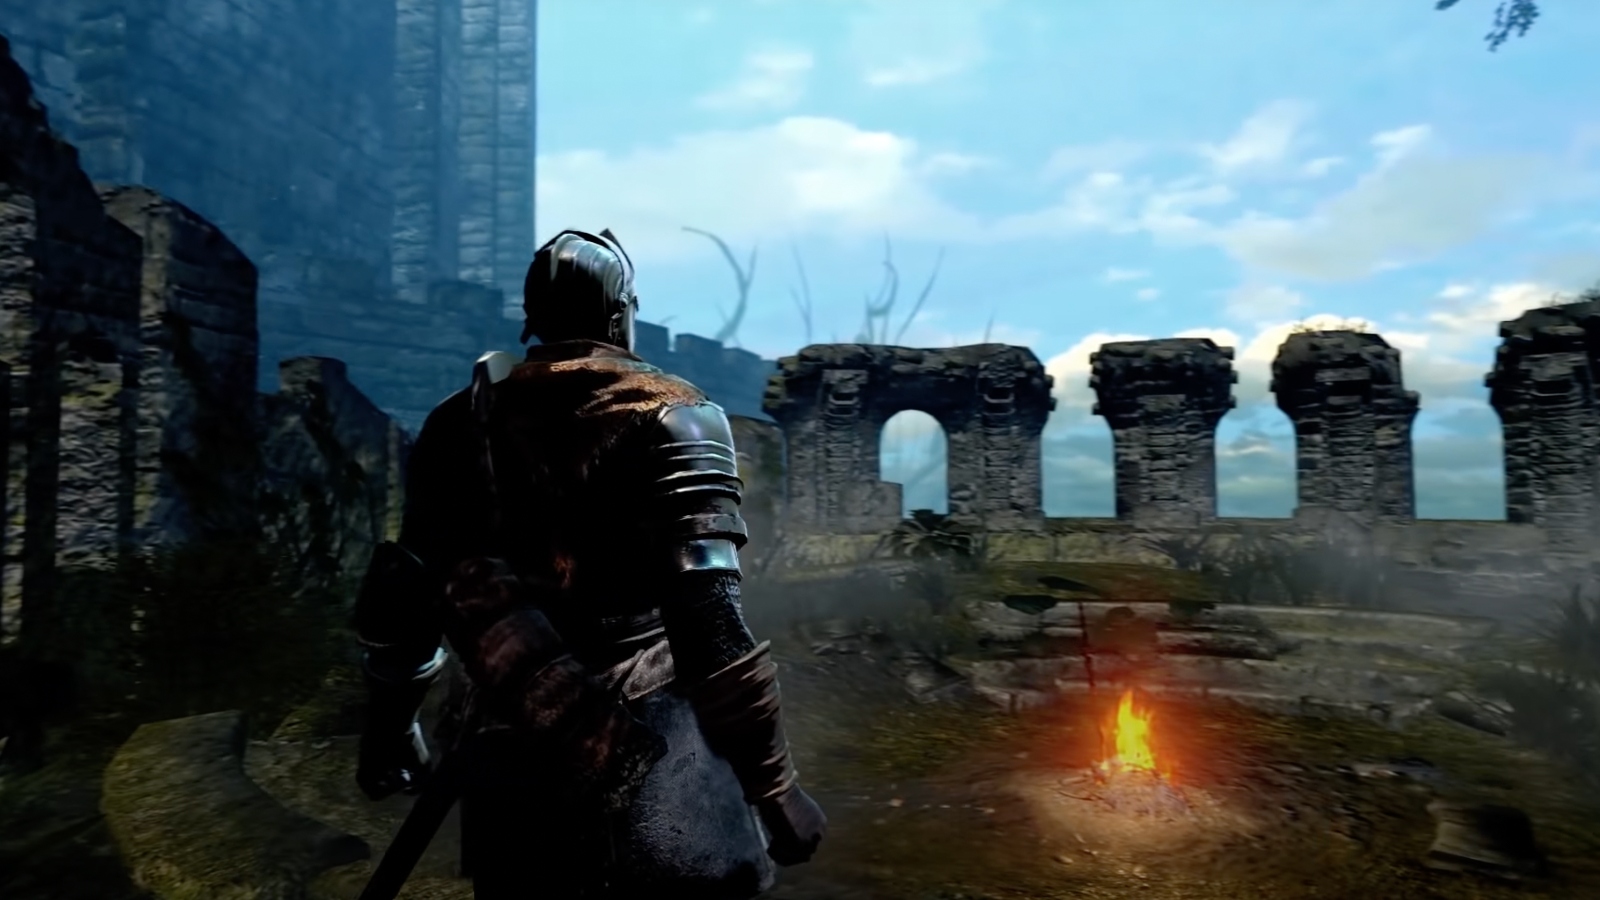 A Dark Souls RPG Tabletop Game Has Been Announced